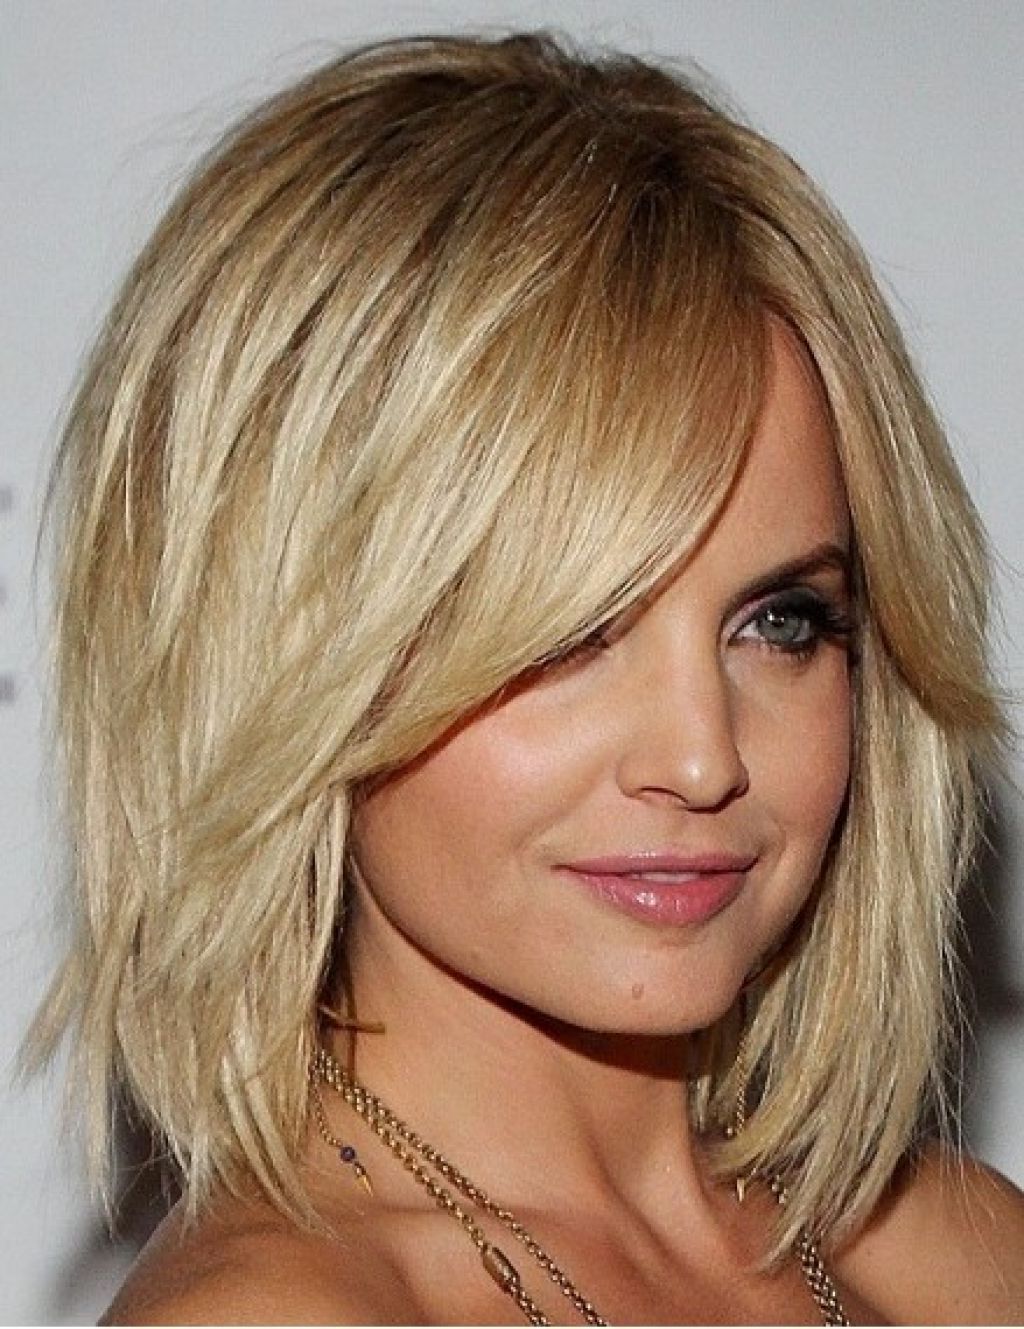 Choppy Bob Style For Mid Length Hair On Women (View 1 of 20)